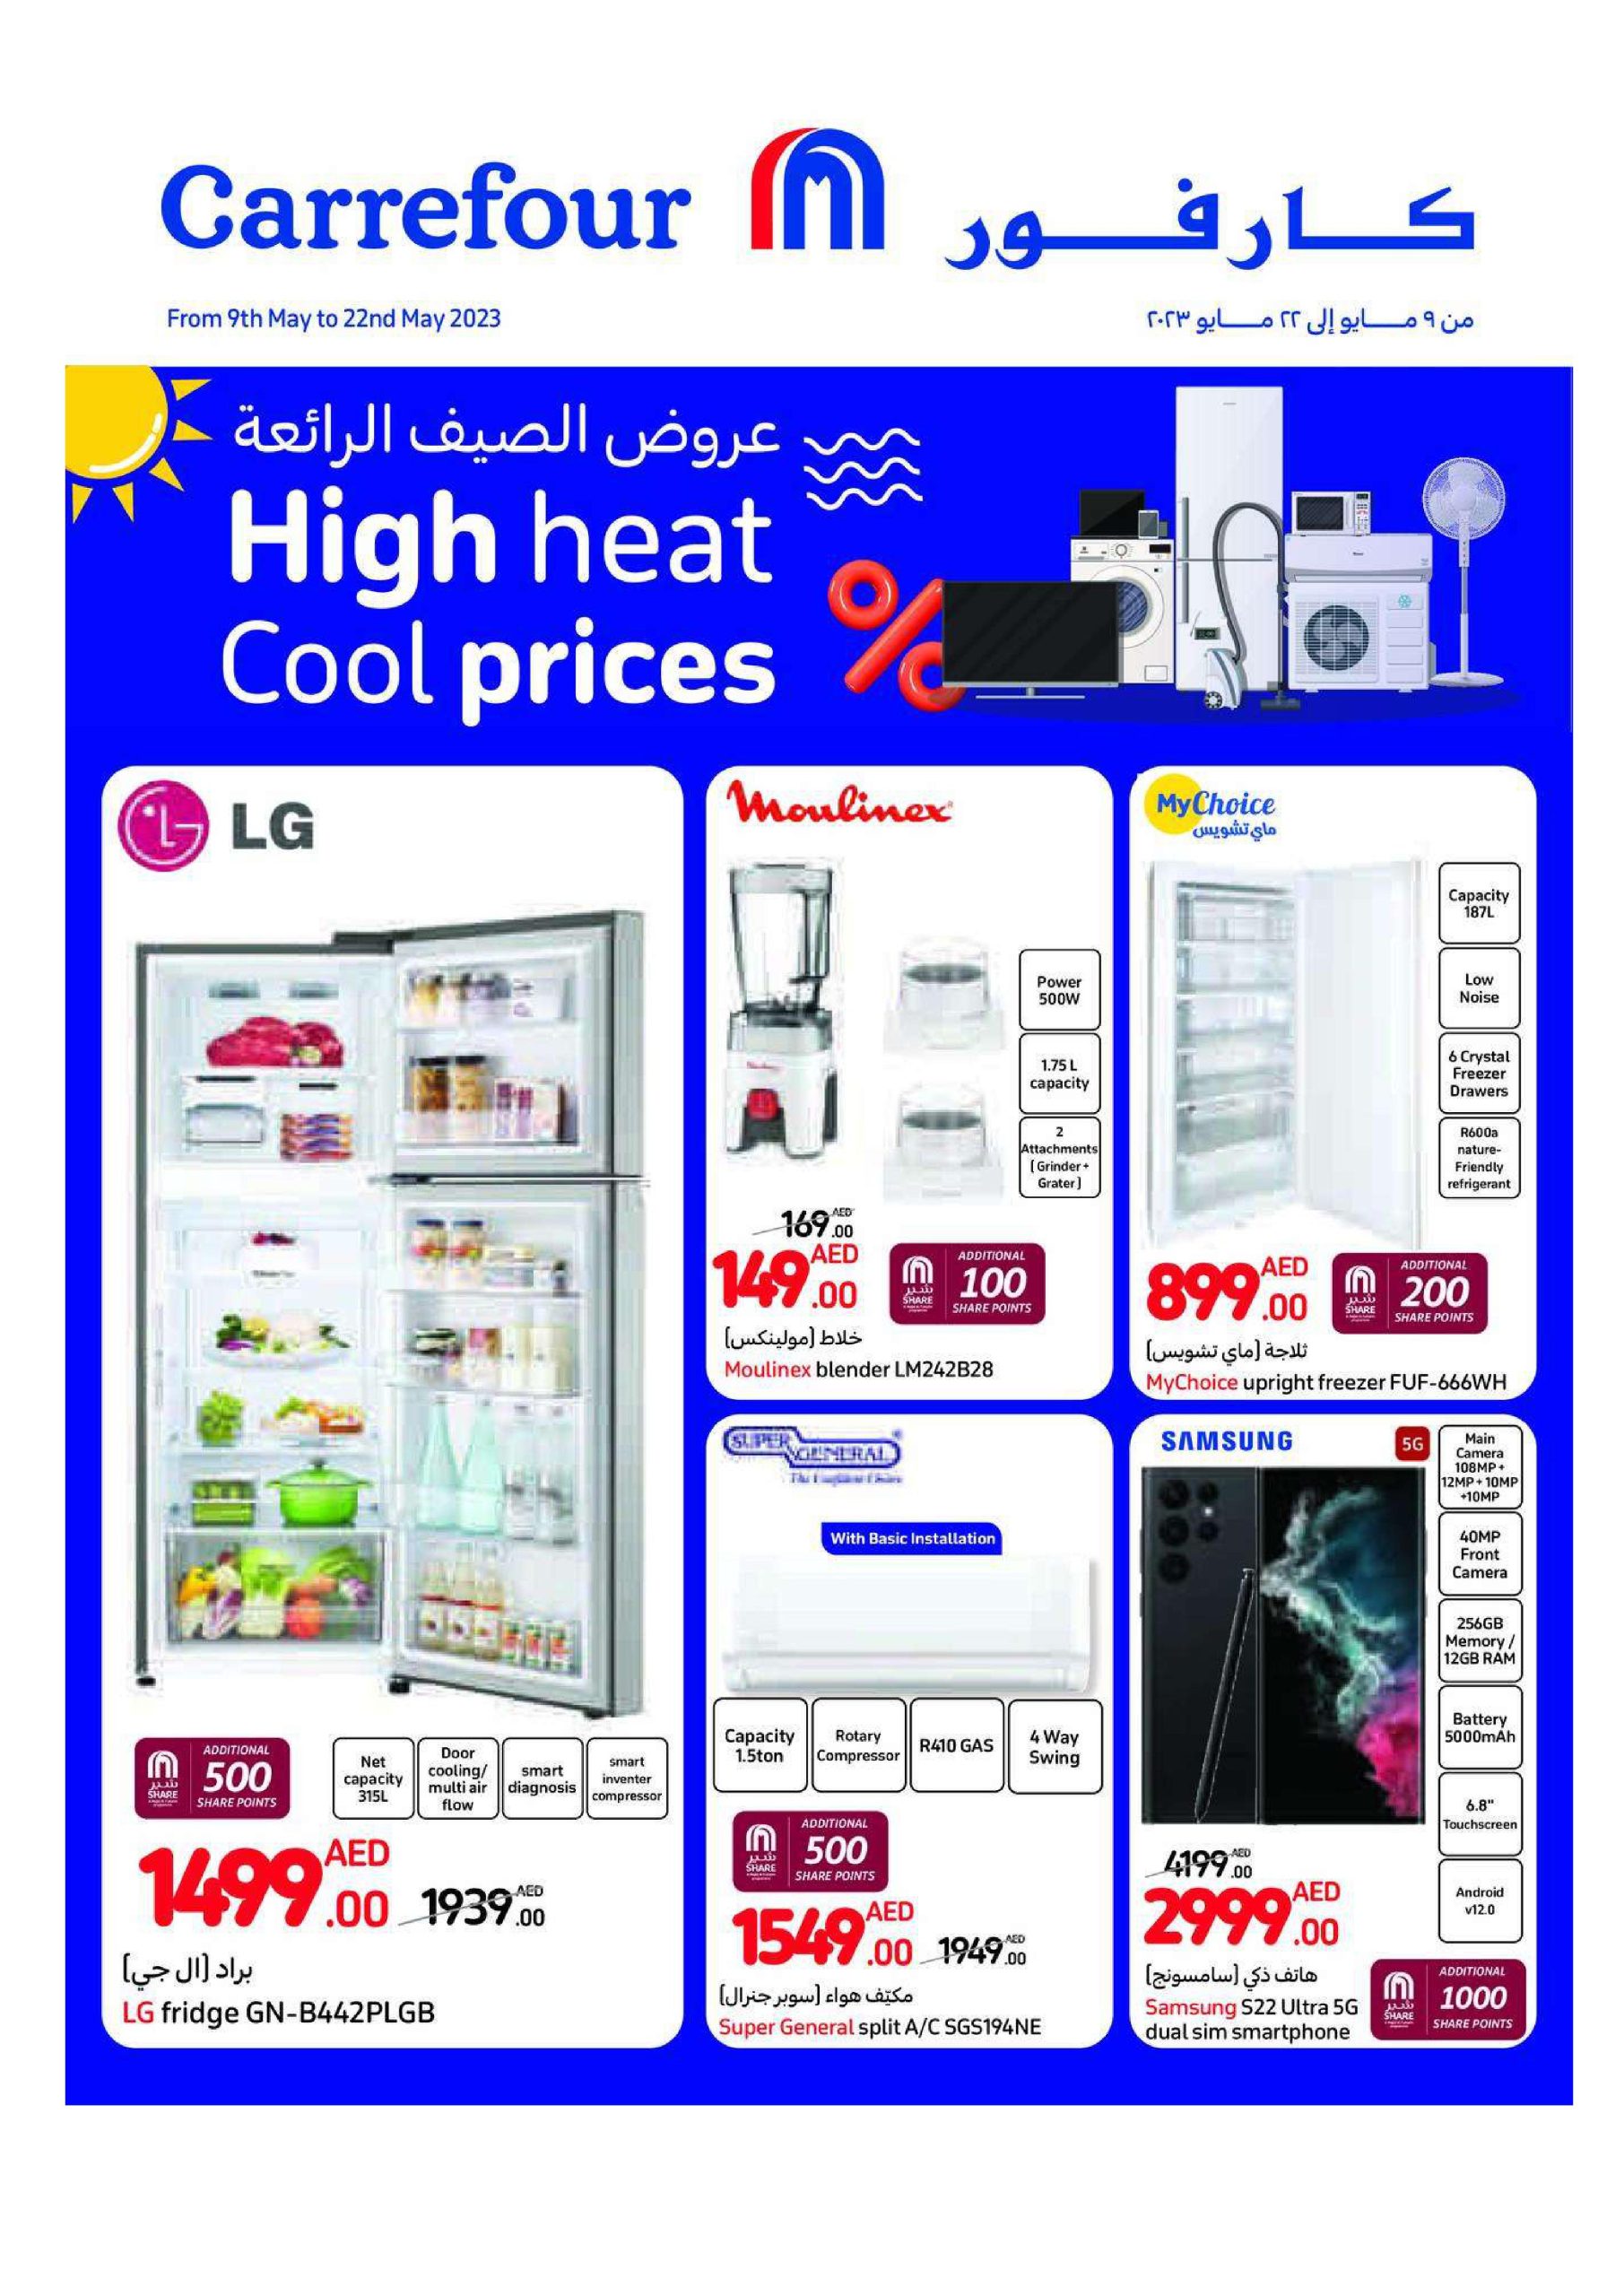 Carrefour High Heat Cool Prices Catalog